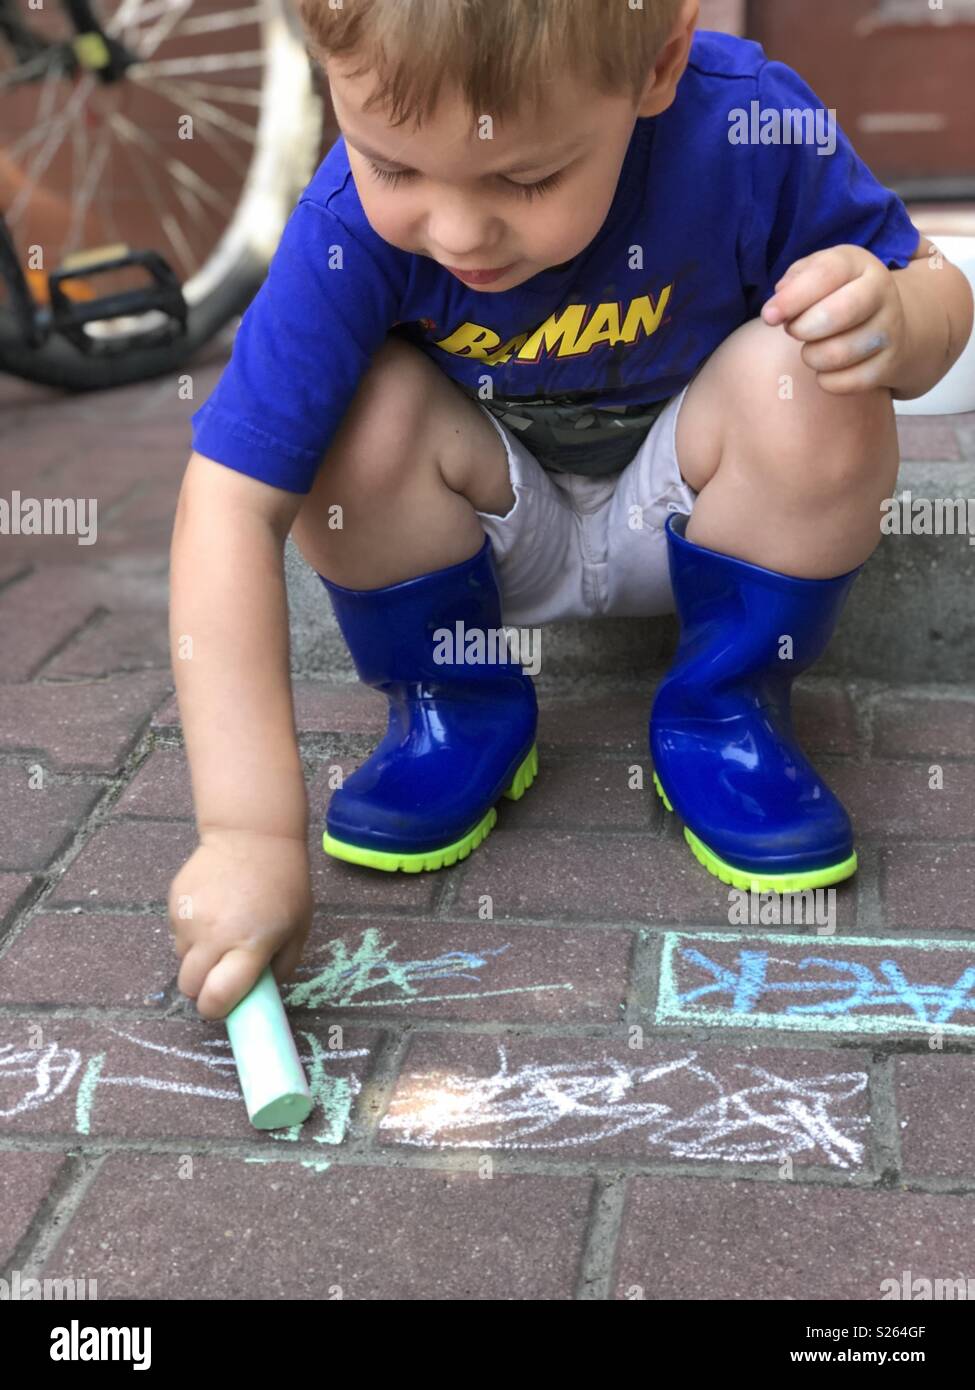 A boy coloring on a brick pavement outside with his rain shoes on Stock Photo